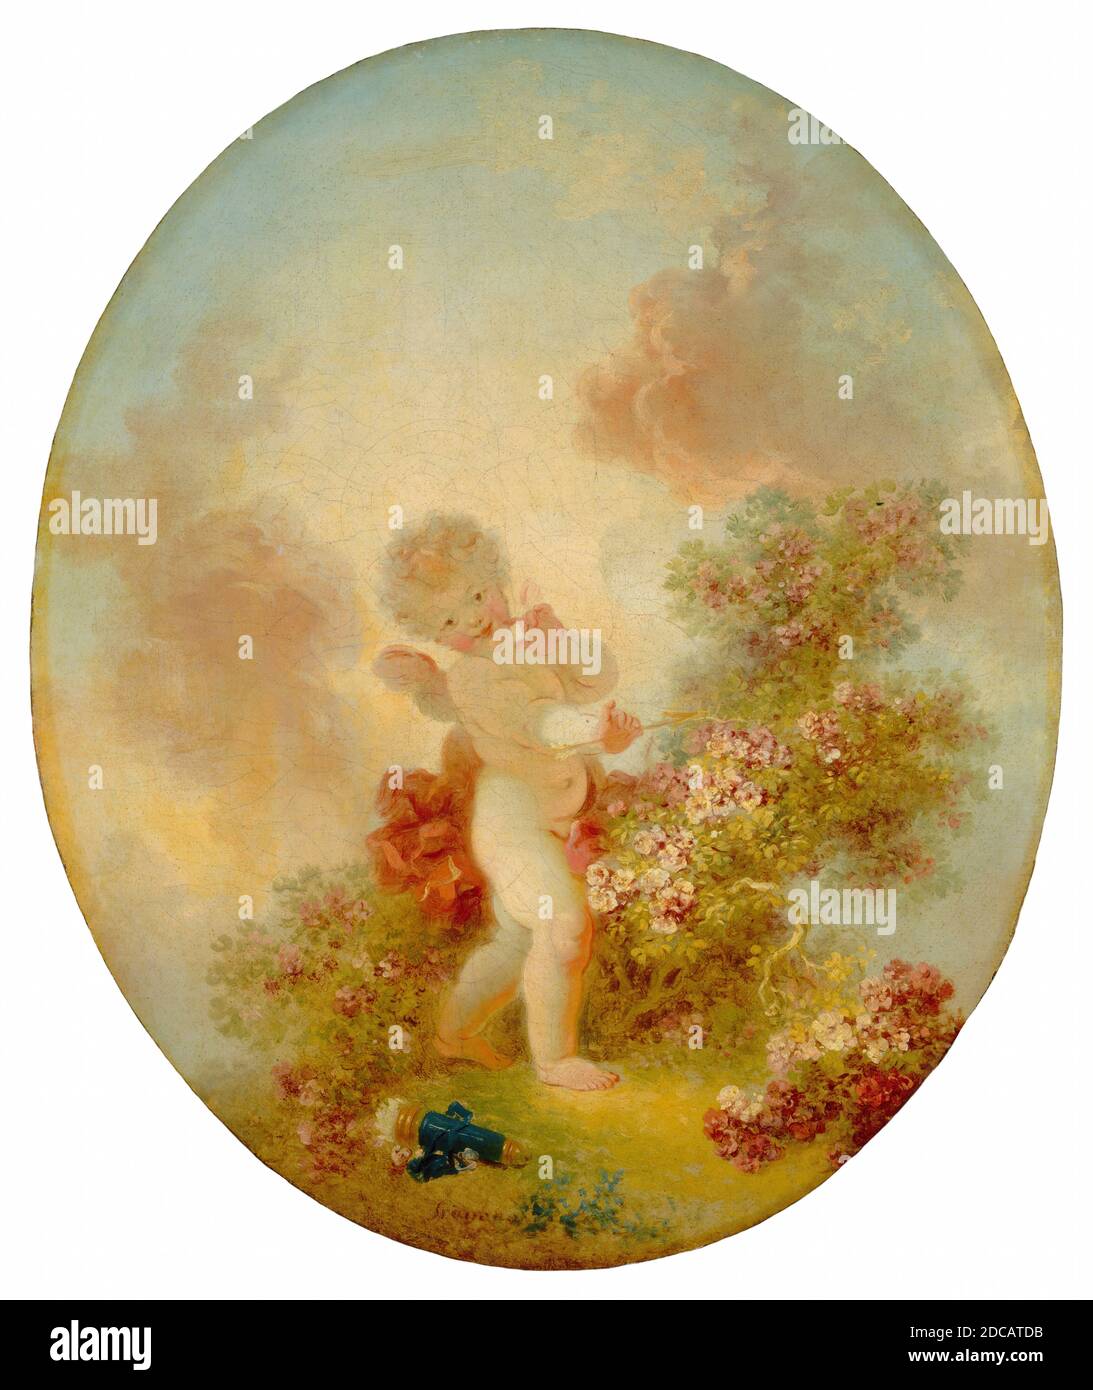 Jean Honoré Fragonard, (artist), French, 1732 - 1806, Love the Sentinel, c. 1773/1776, oil on canvas, overall (oval): 55.9 x 46.7 cm (22 x 18 3/8 in.), framed: 83.8 x 62.2 x 10.2 cm (33 x 24 1/2 x 4 in.), In memory of Kate Seney Simpson Stock Photo